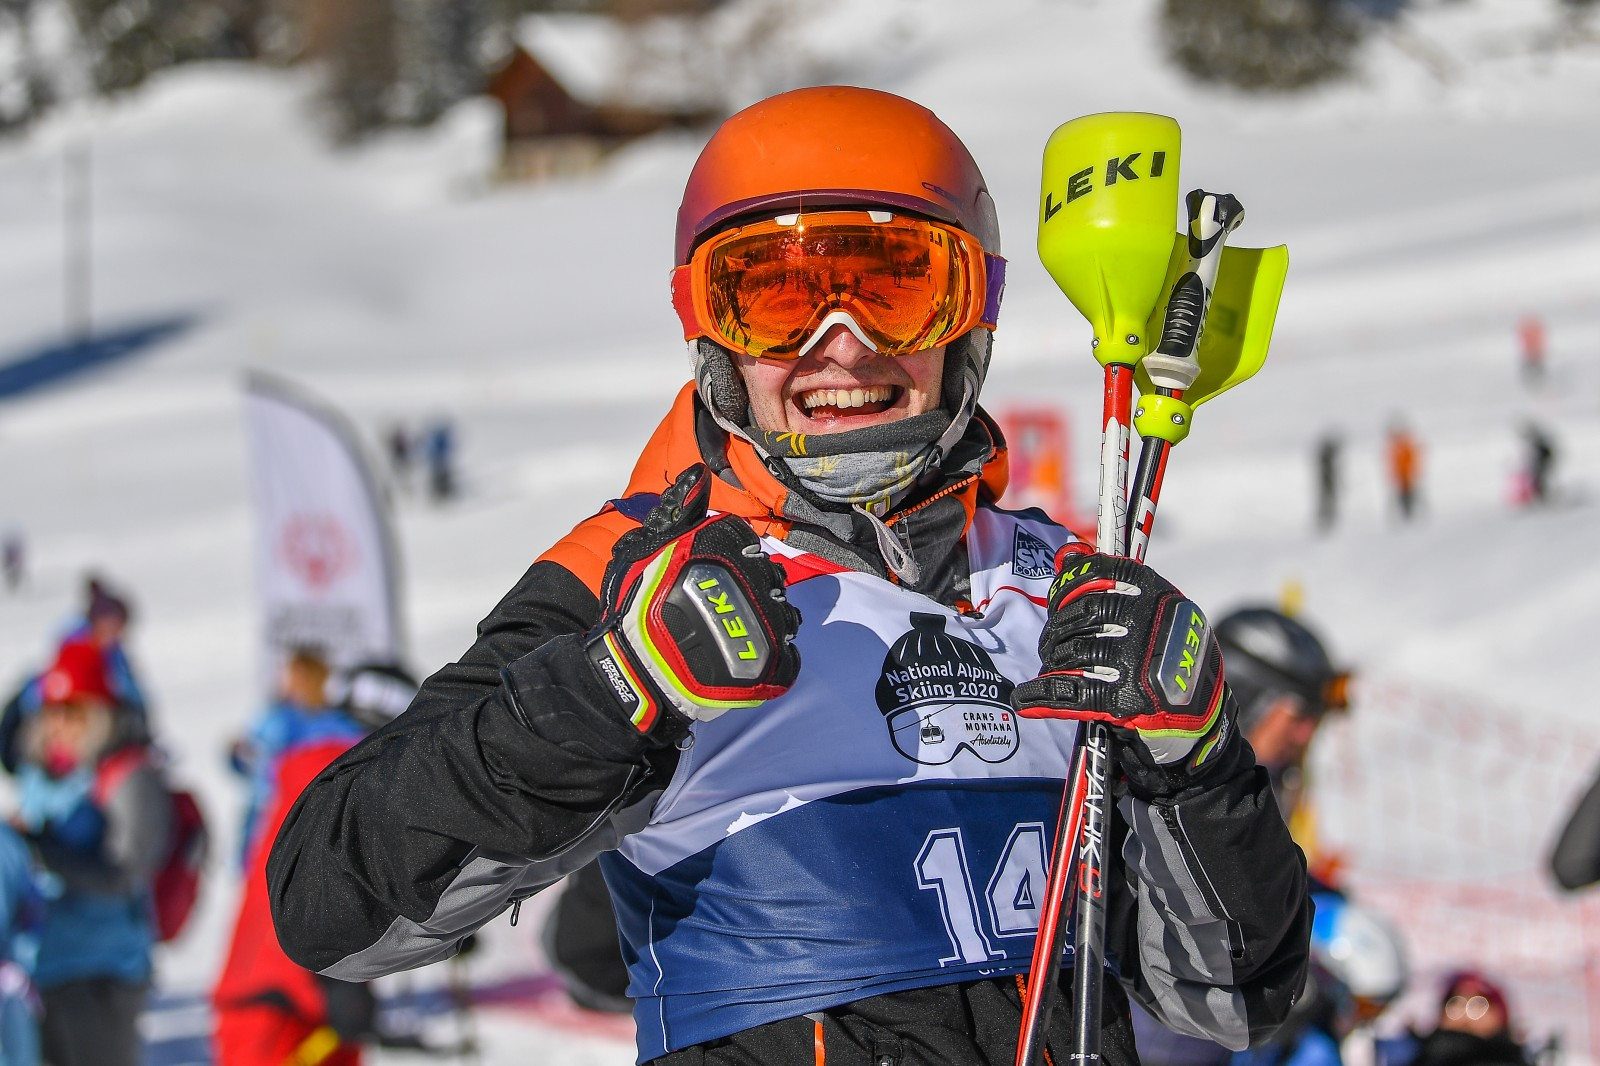 Special Olympics GB announces team for 2022 Special Olympics World Winter Games